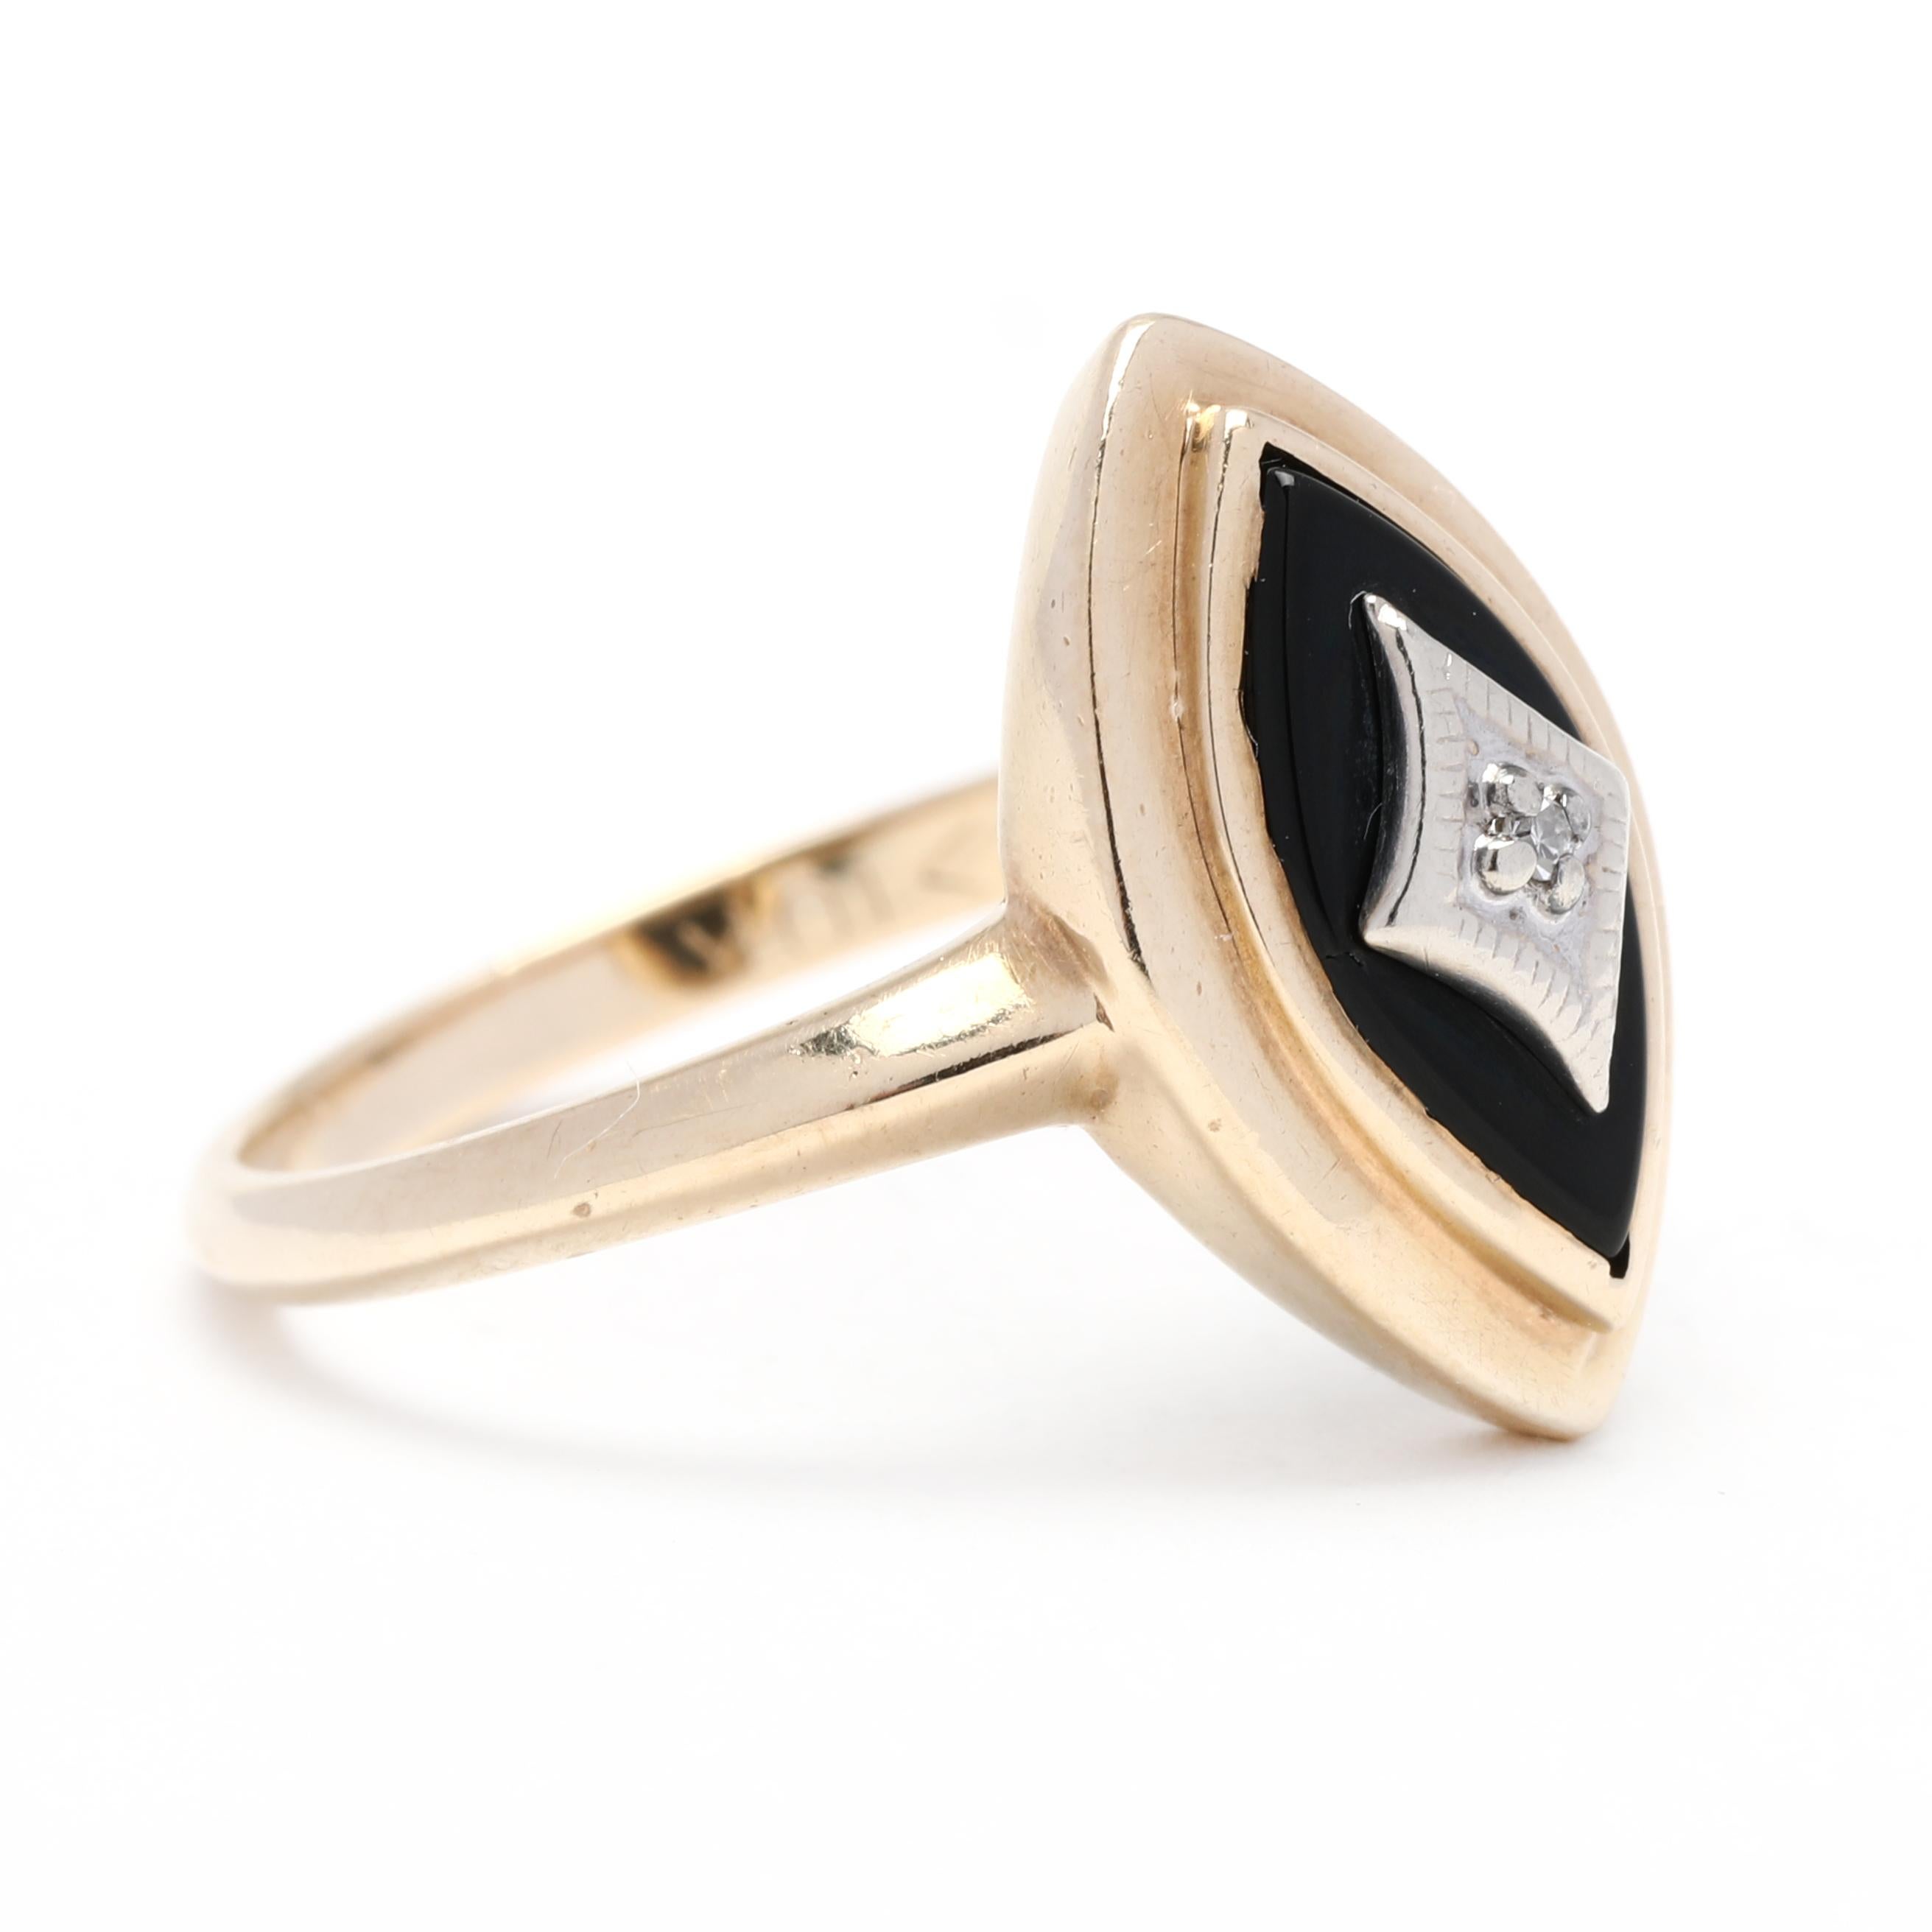 This beautiful black onyx diamond navette ring is crafted from 10K yellow gold and features a stunning marquise black onyx gemstone. The classic design of this simple black onyx ring makes it perfect for everyday wear and special occasions alike.